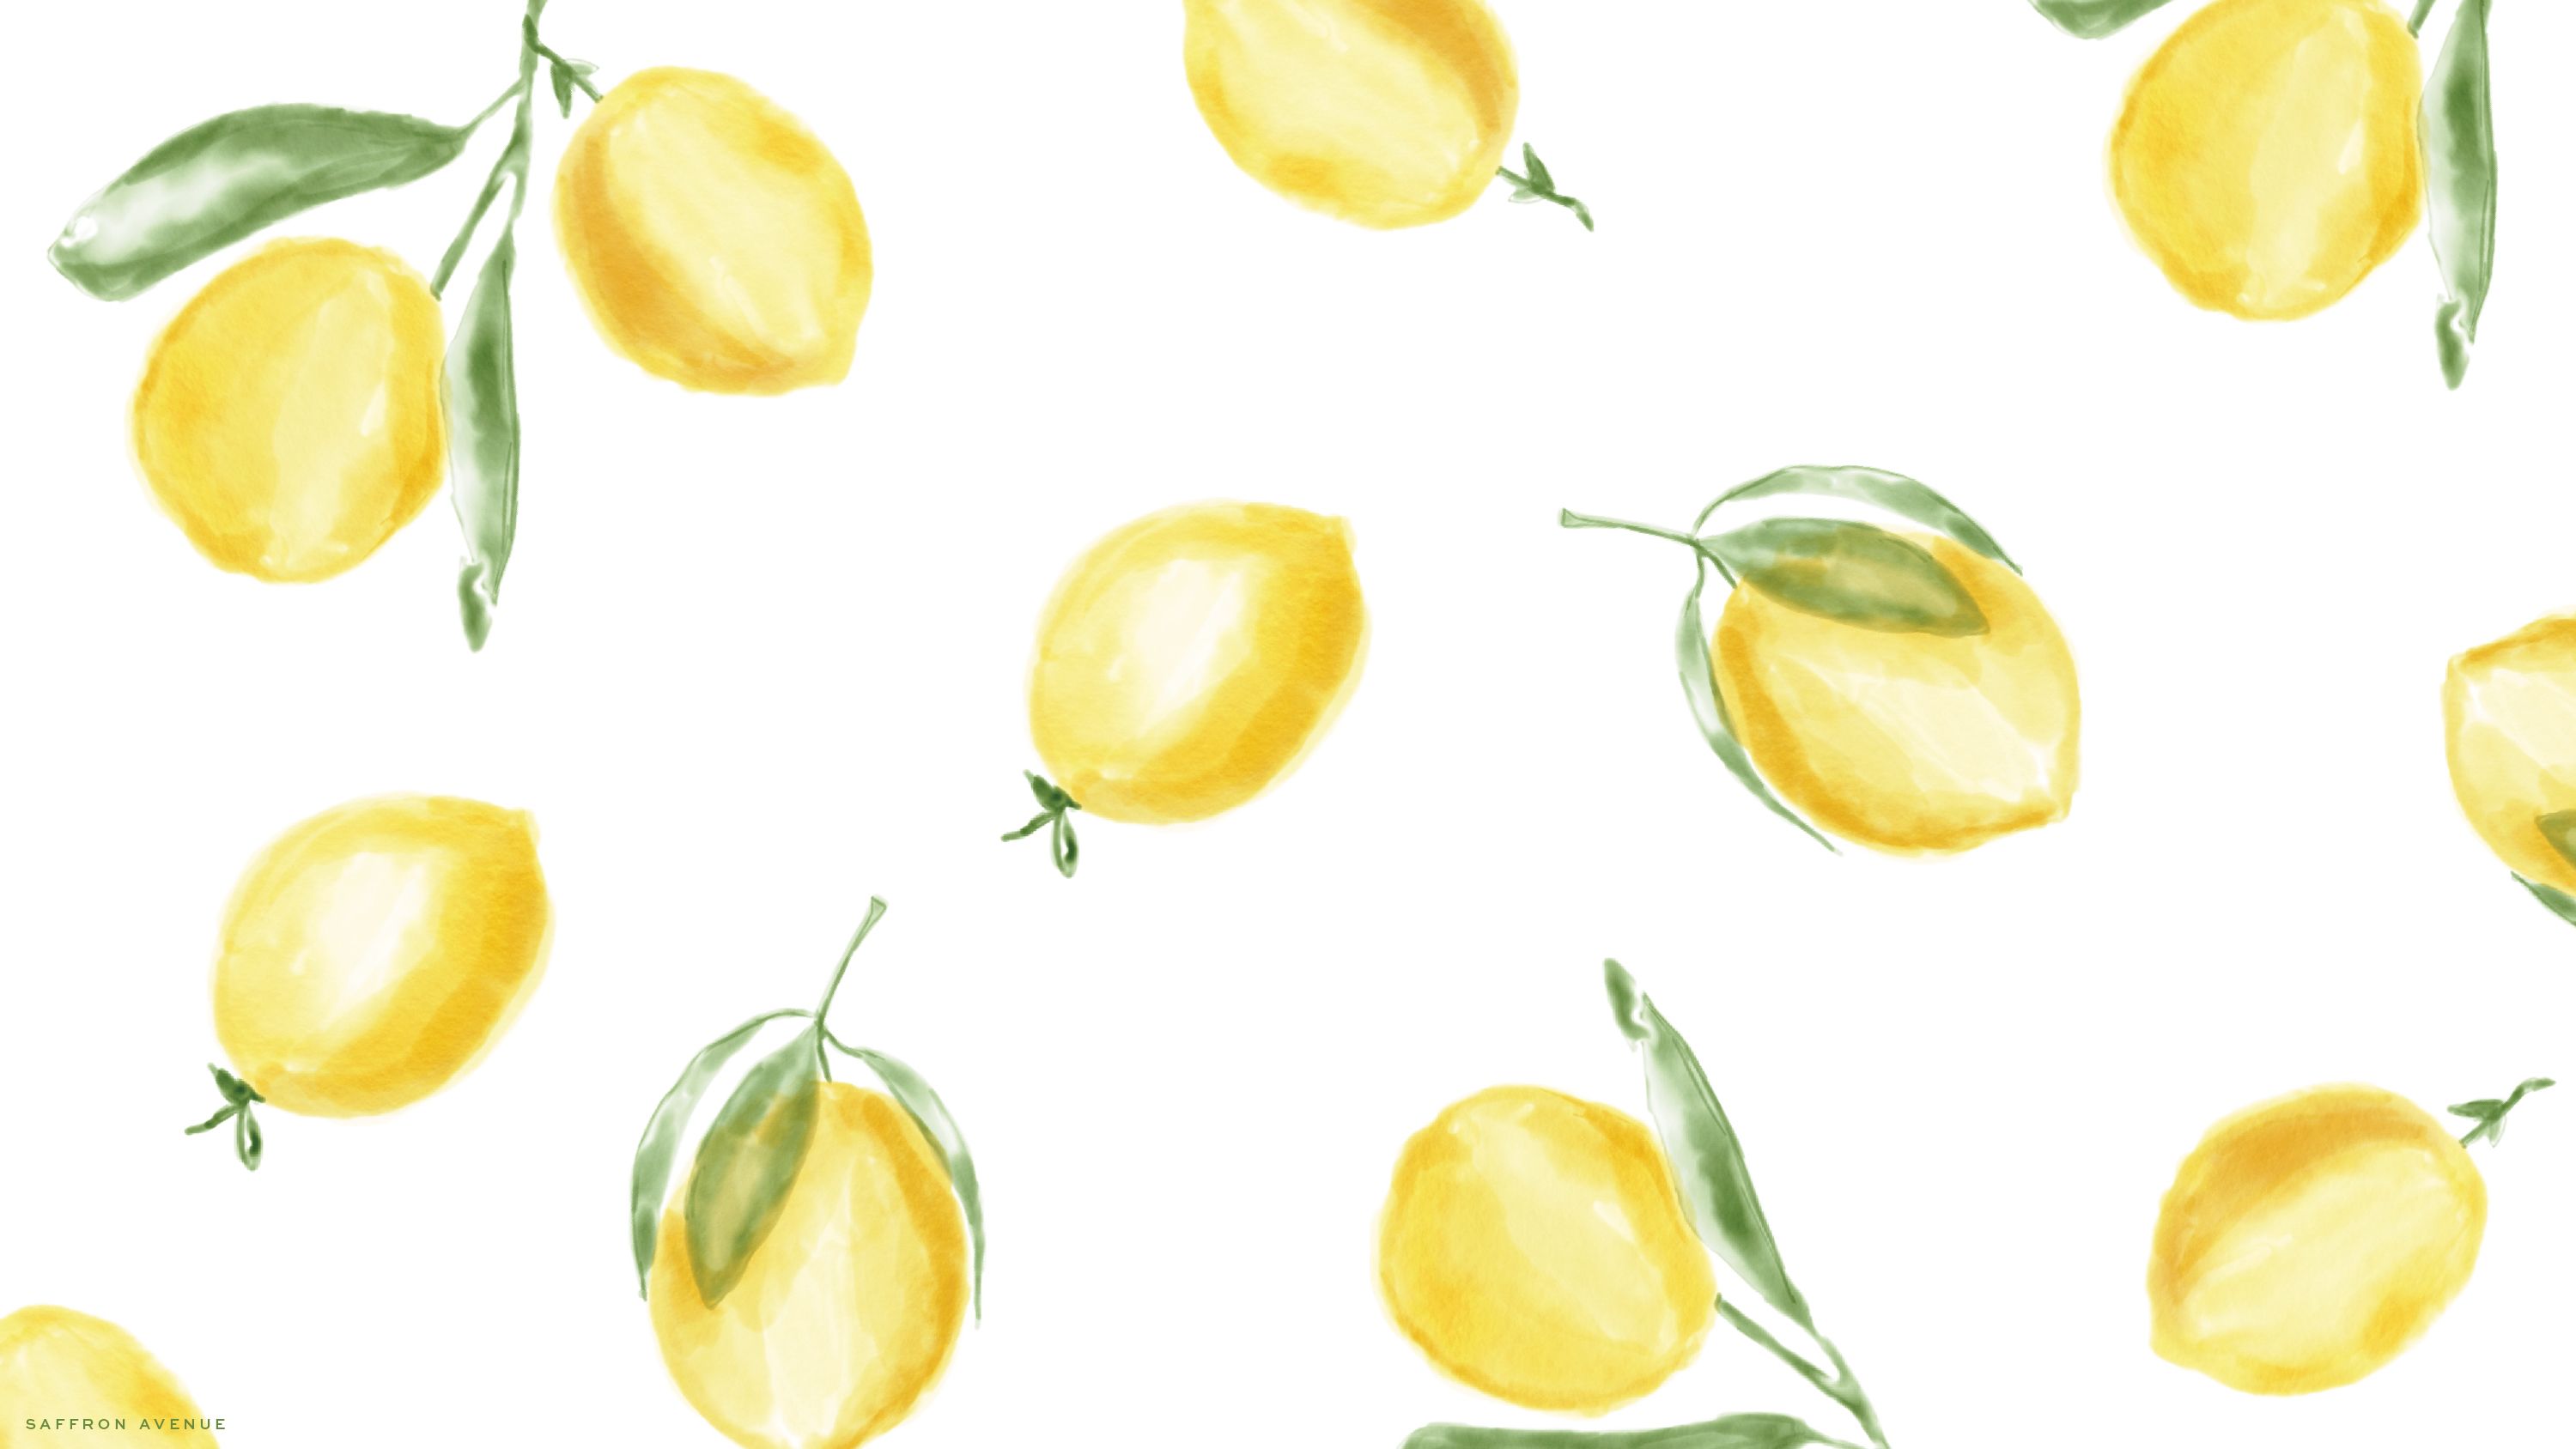 A pattern of lemons with leaves and stems - Lemon, bright